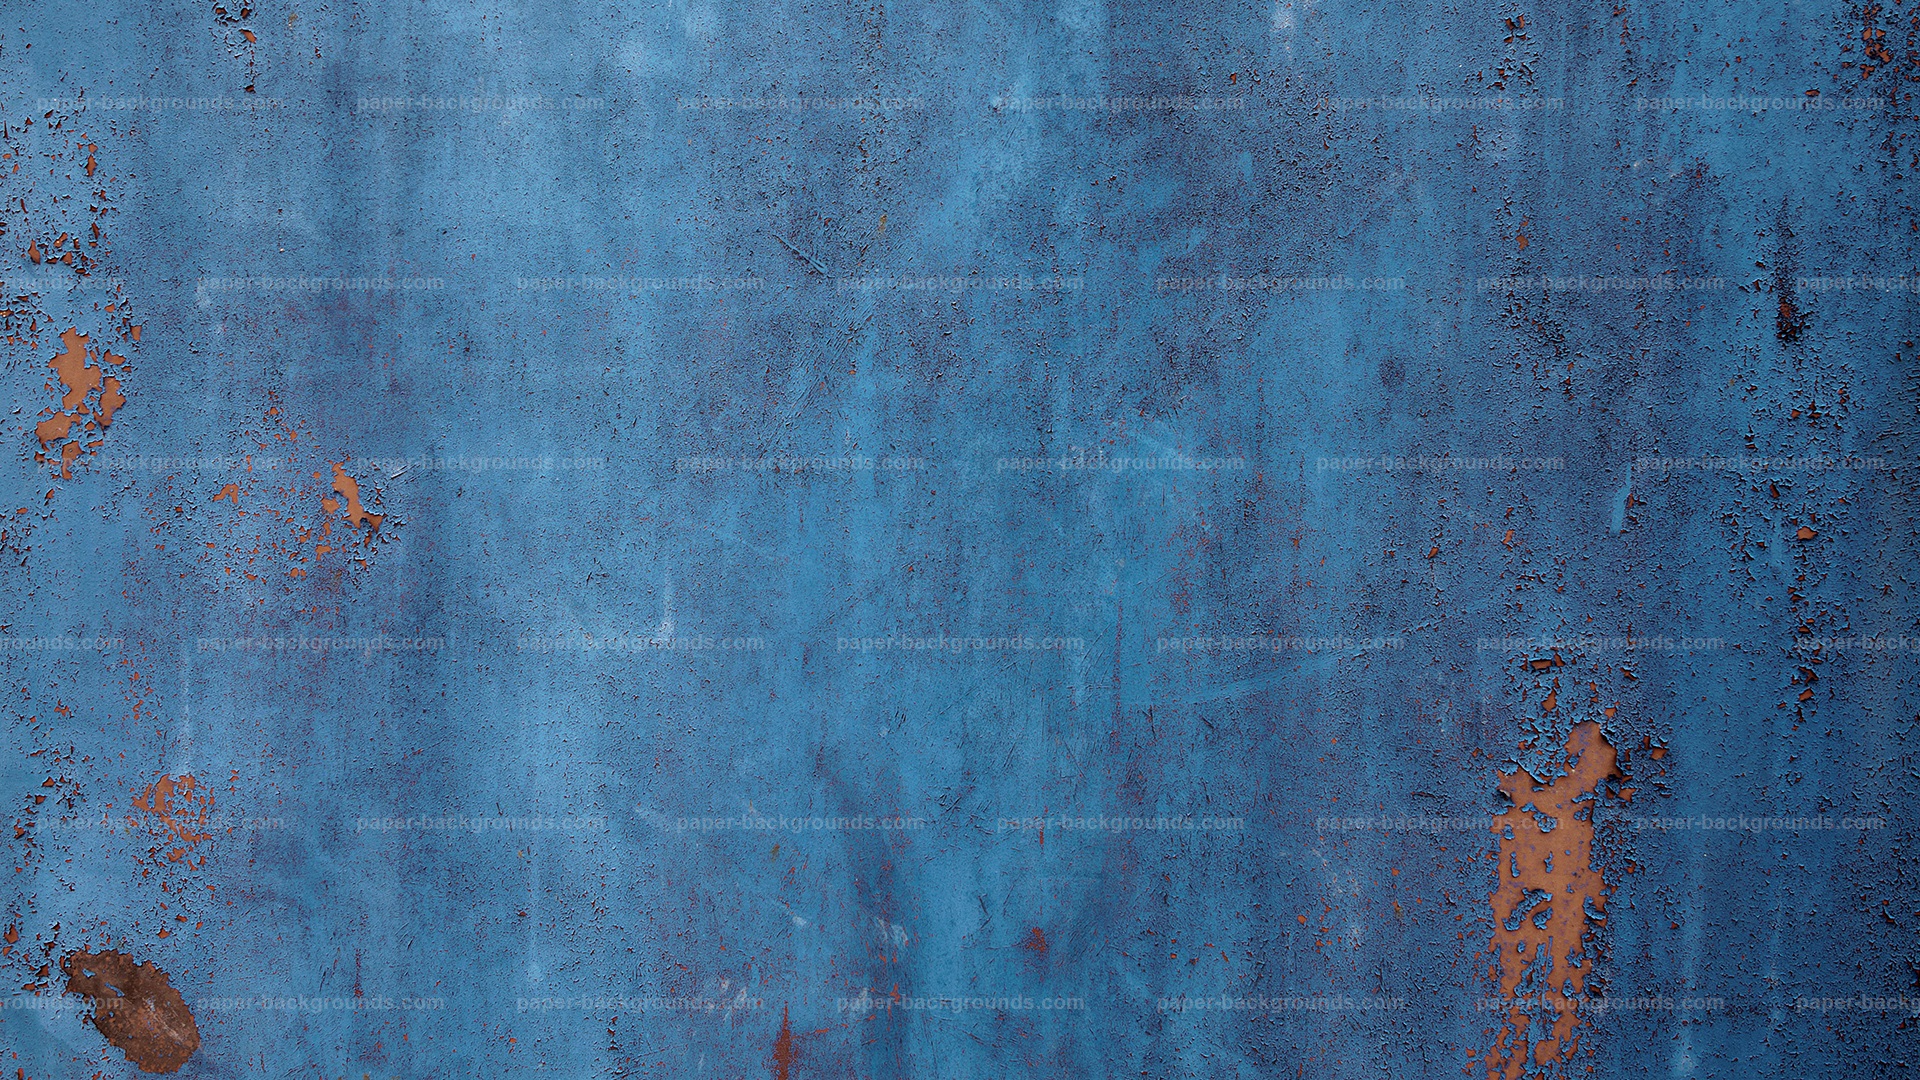 Blue Rusty Metal Background Texture HD Paper Backgrounds